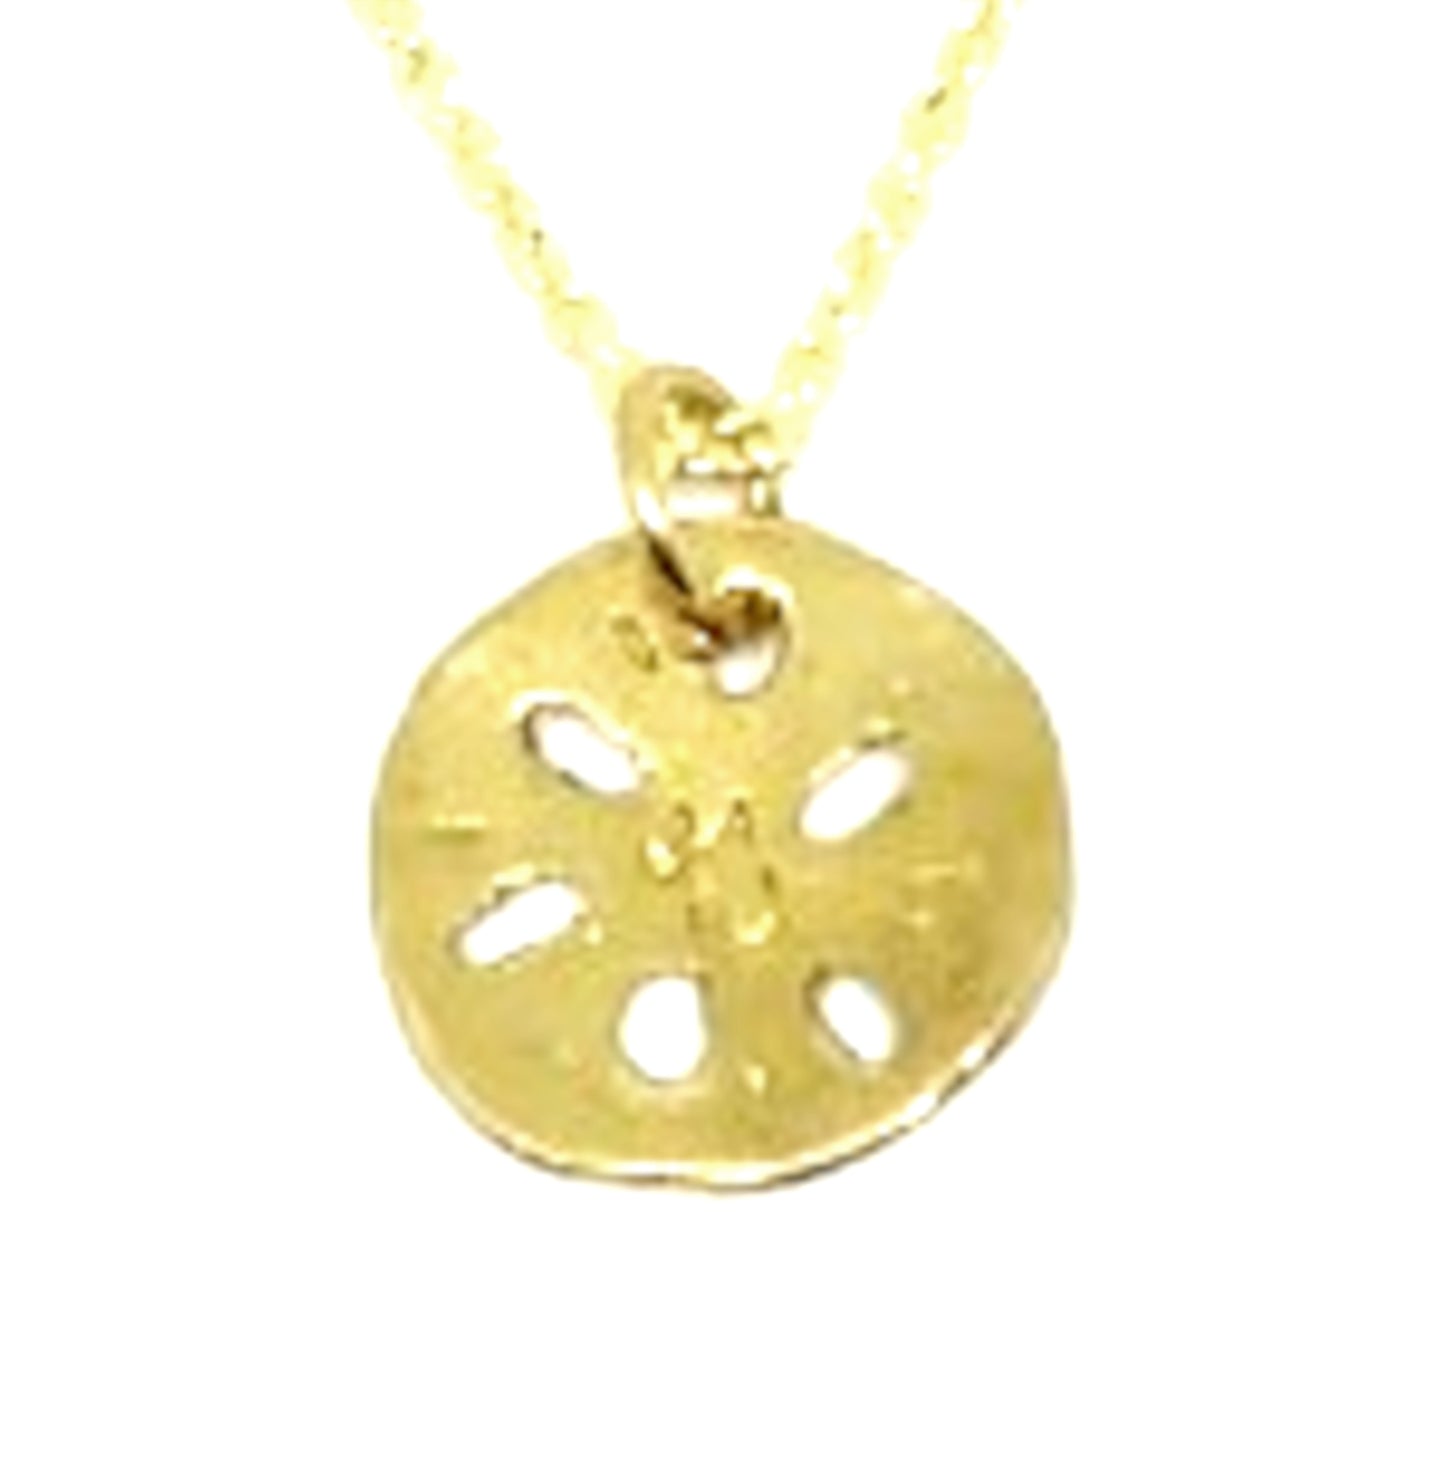 Lotus Root Pendant Necklace in 18K Yellow Gold Plated Sterling Silver